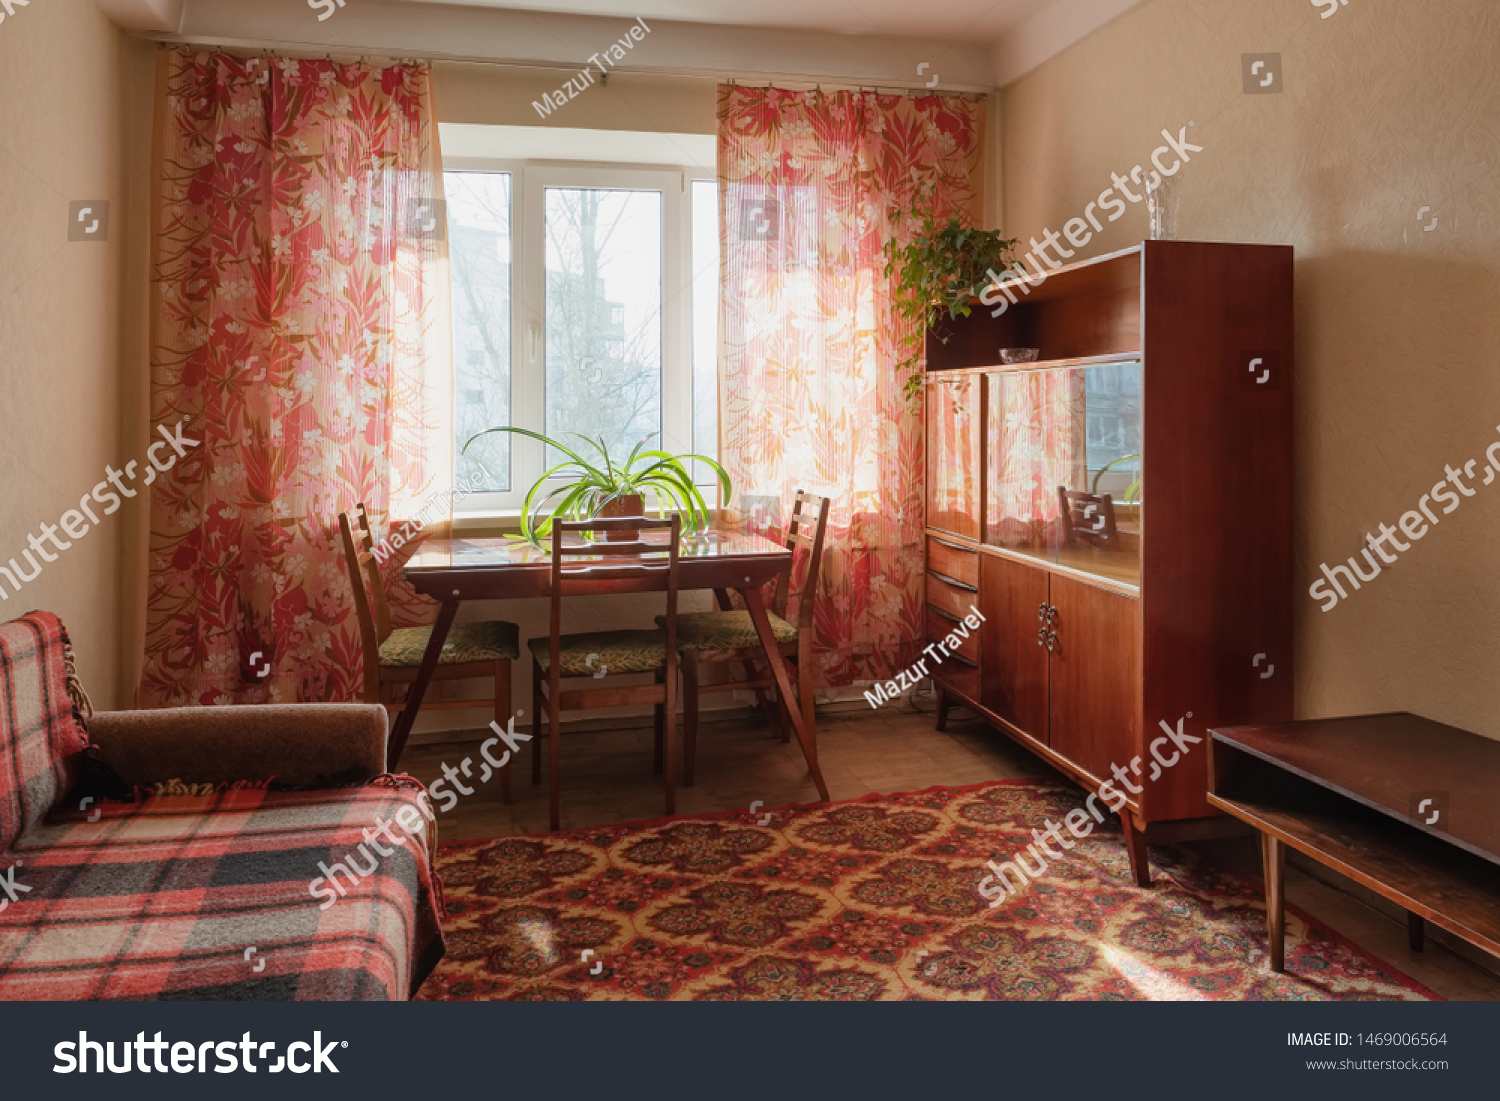 Interior of typical soviet style apartment. Old furniture and retro design #1469006564